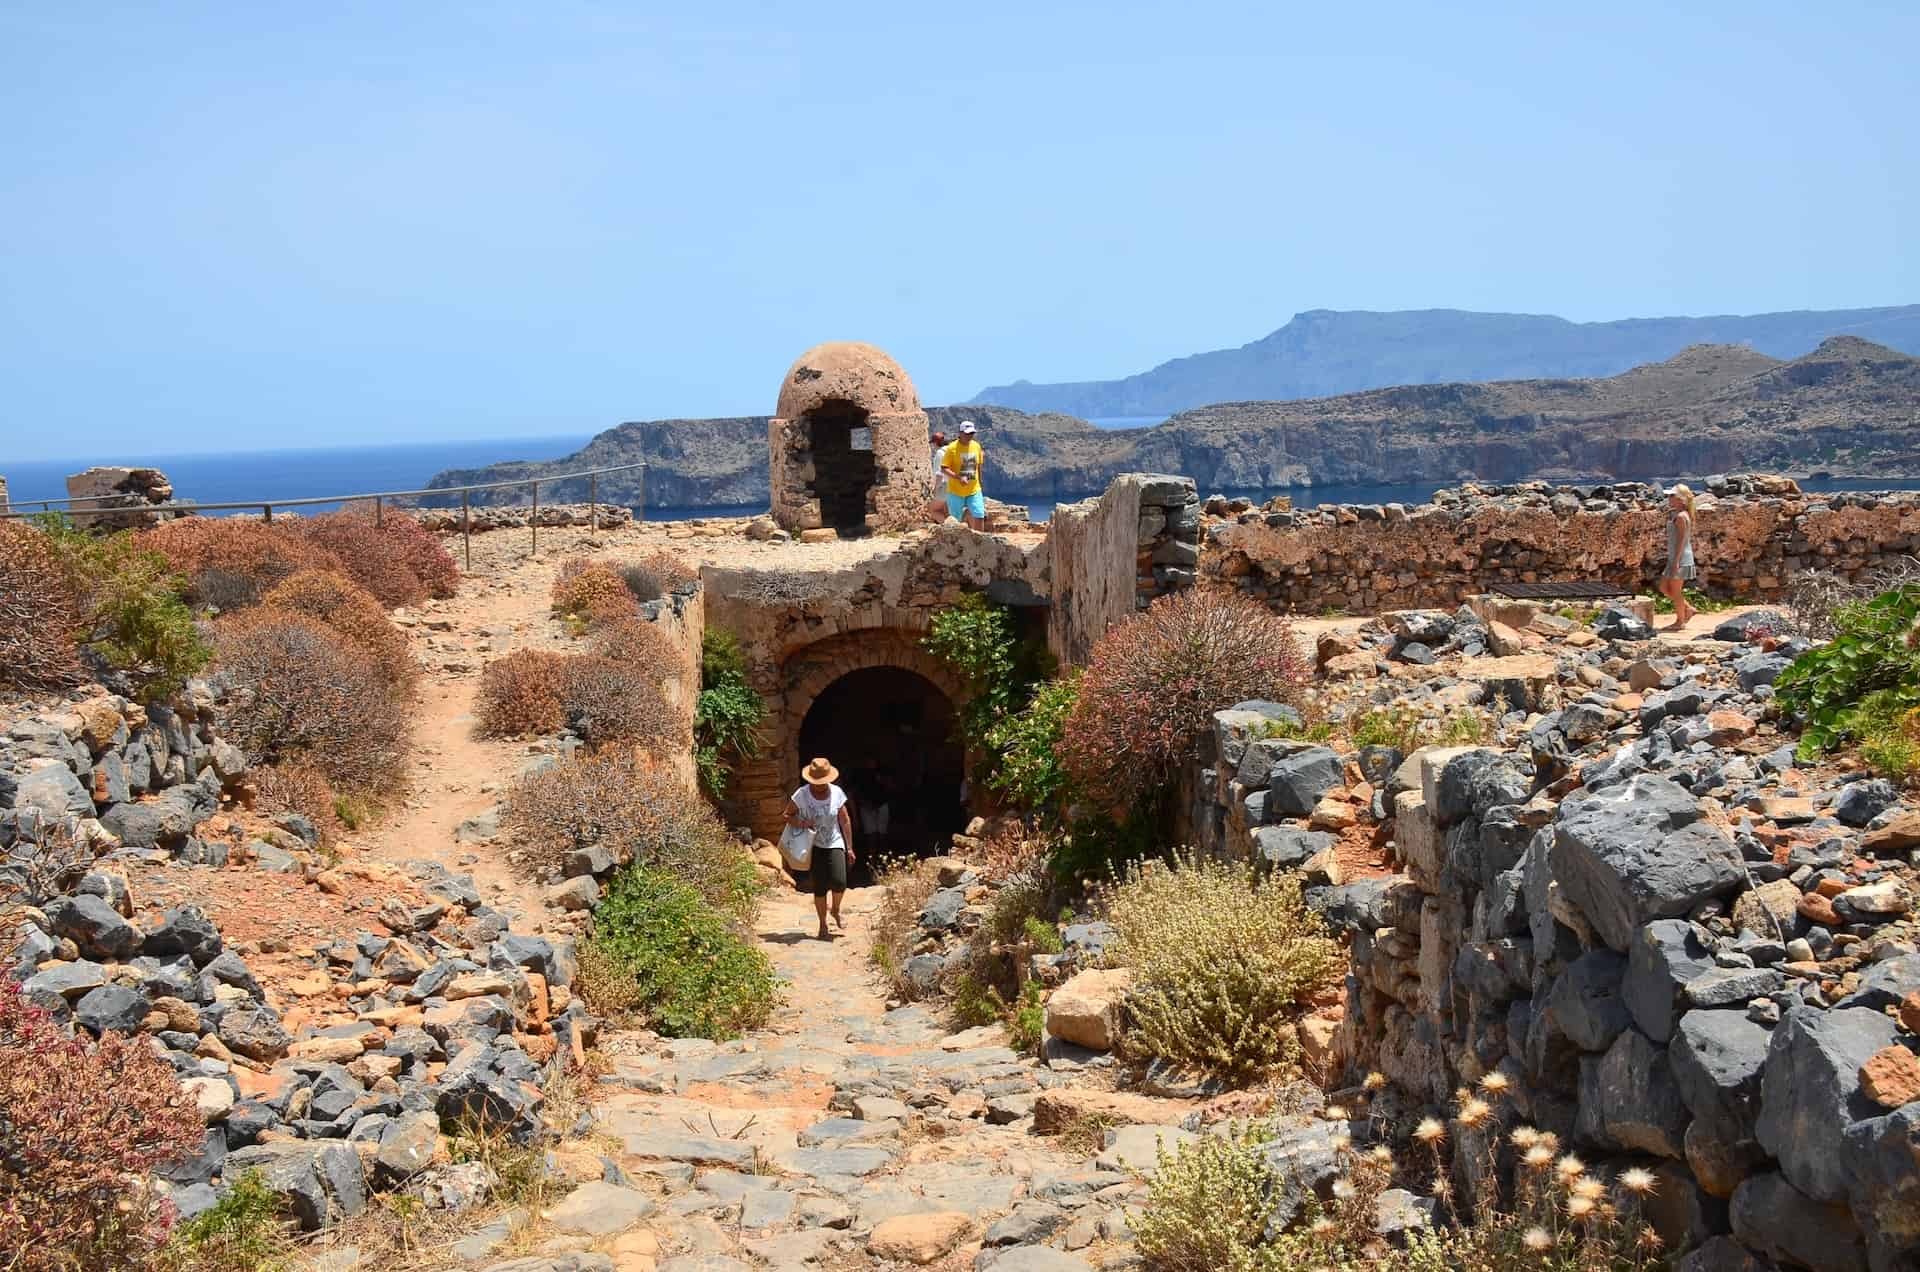 Ramp from the guardhouse up to the Venetian fortress at Gramvousa, Crete